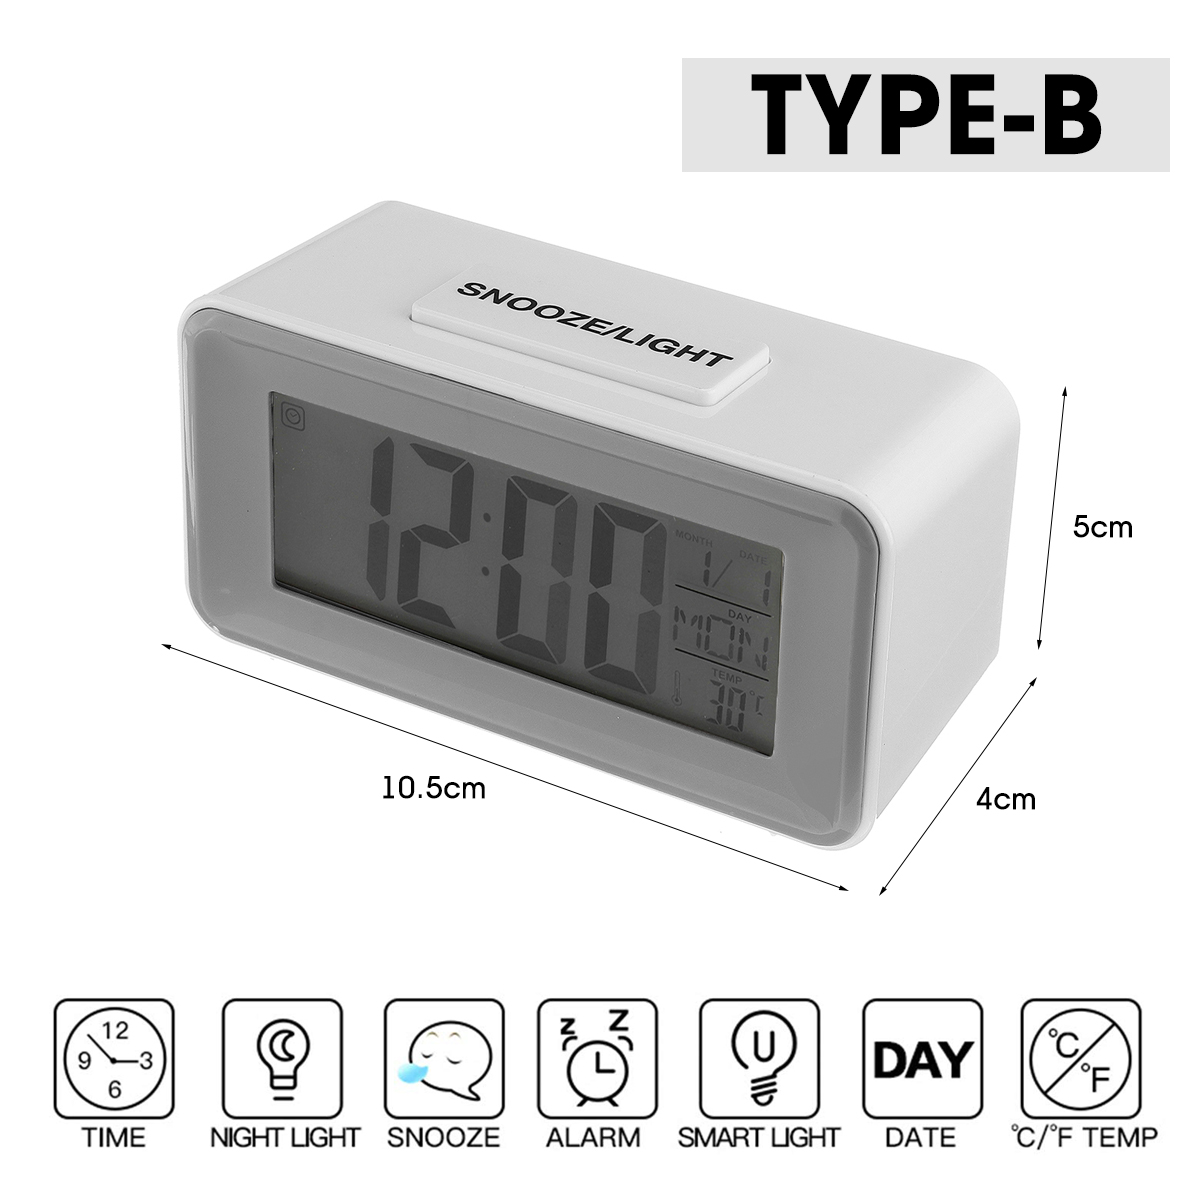 Backlight-LCD-Digital-Alarm-Clock-45quot32quot-Large-Display-Night-Light-with-Calendar-Thermometer-E-1760102-5